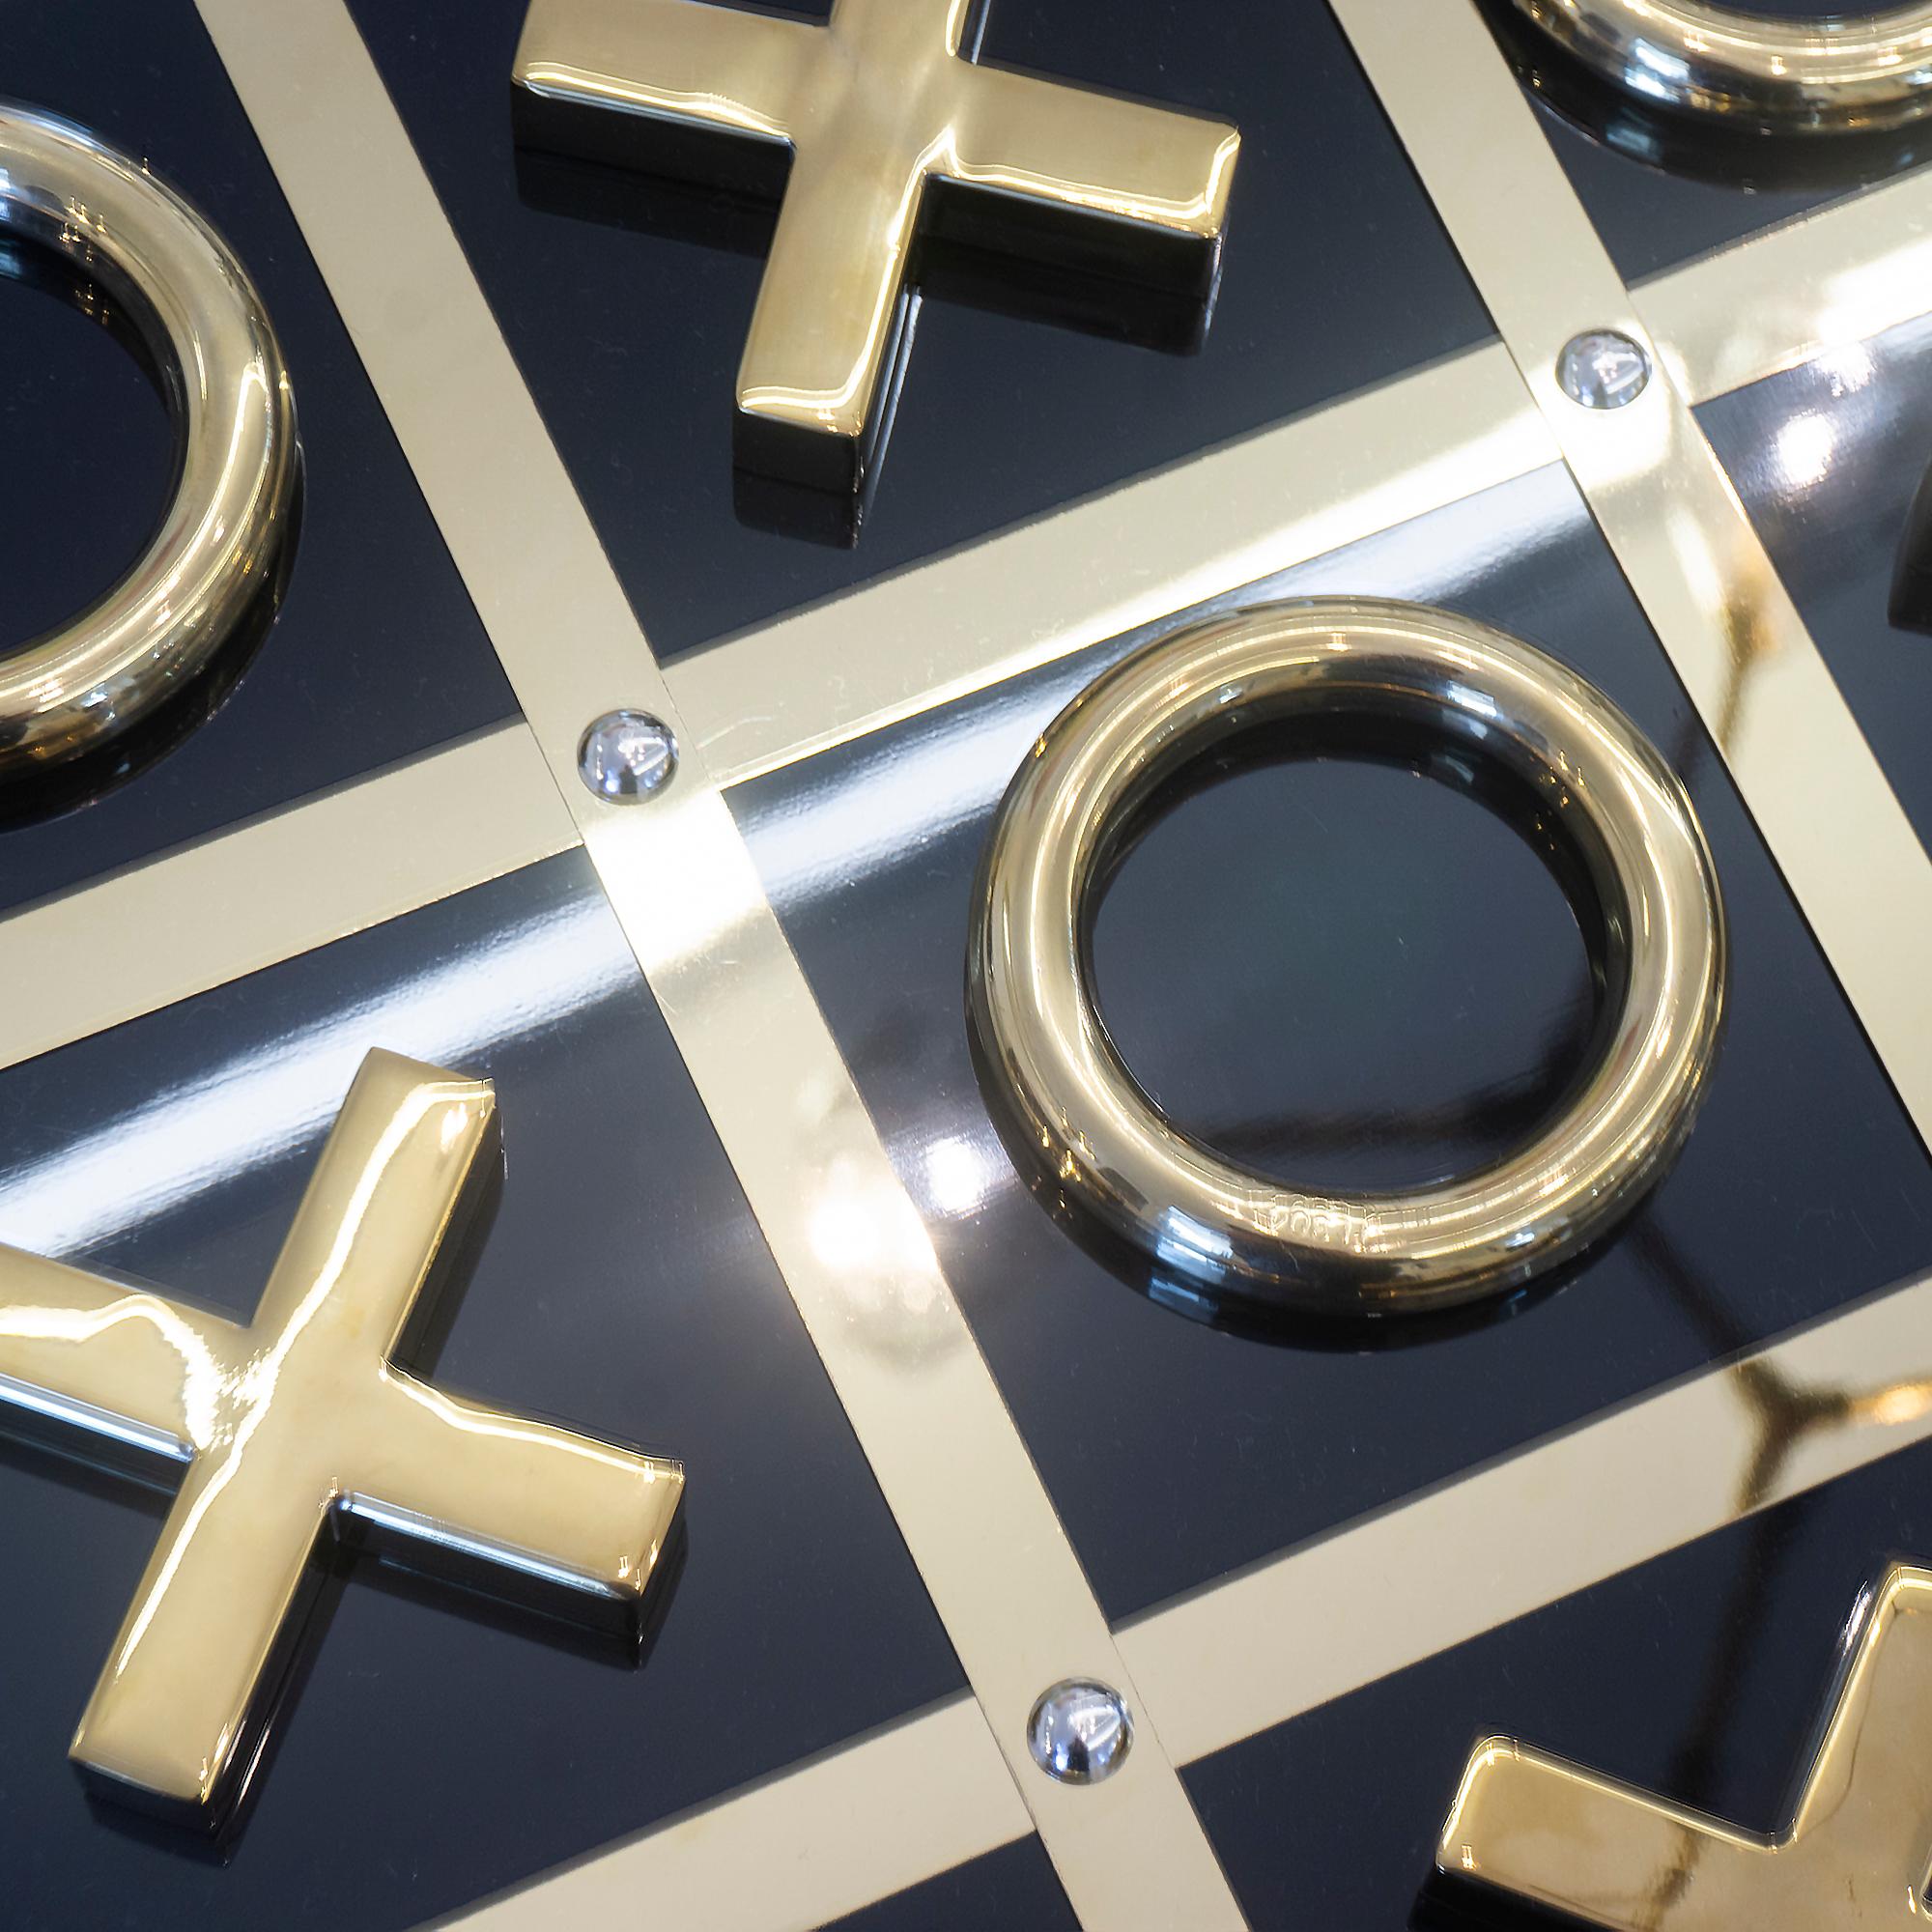 A luxury game night is ready with this black and gold Tic Tac Toe set made out of high quality acrylic with gold accents. Comes with 5 X’s and 5 O’s. 

Dimensions: 2